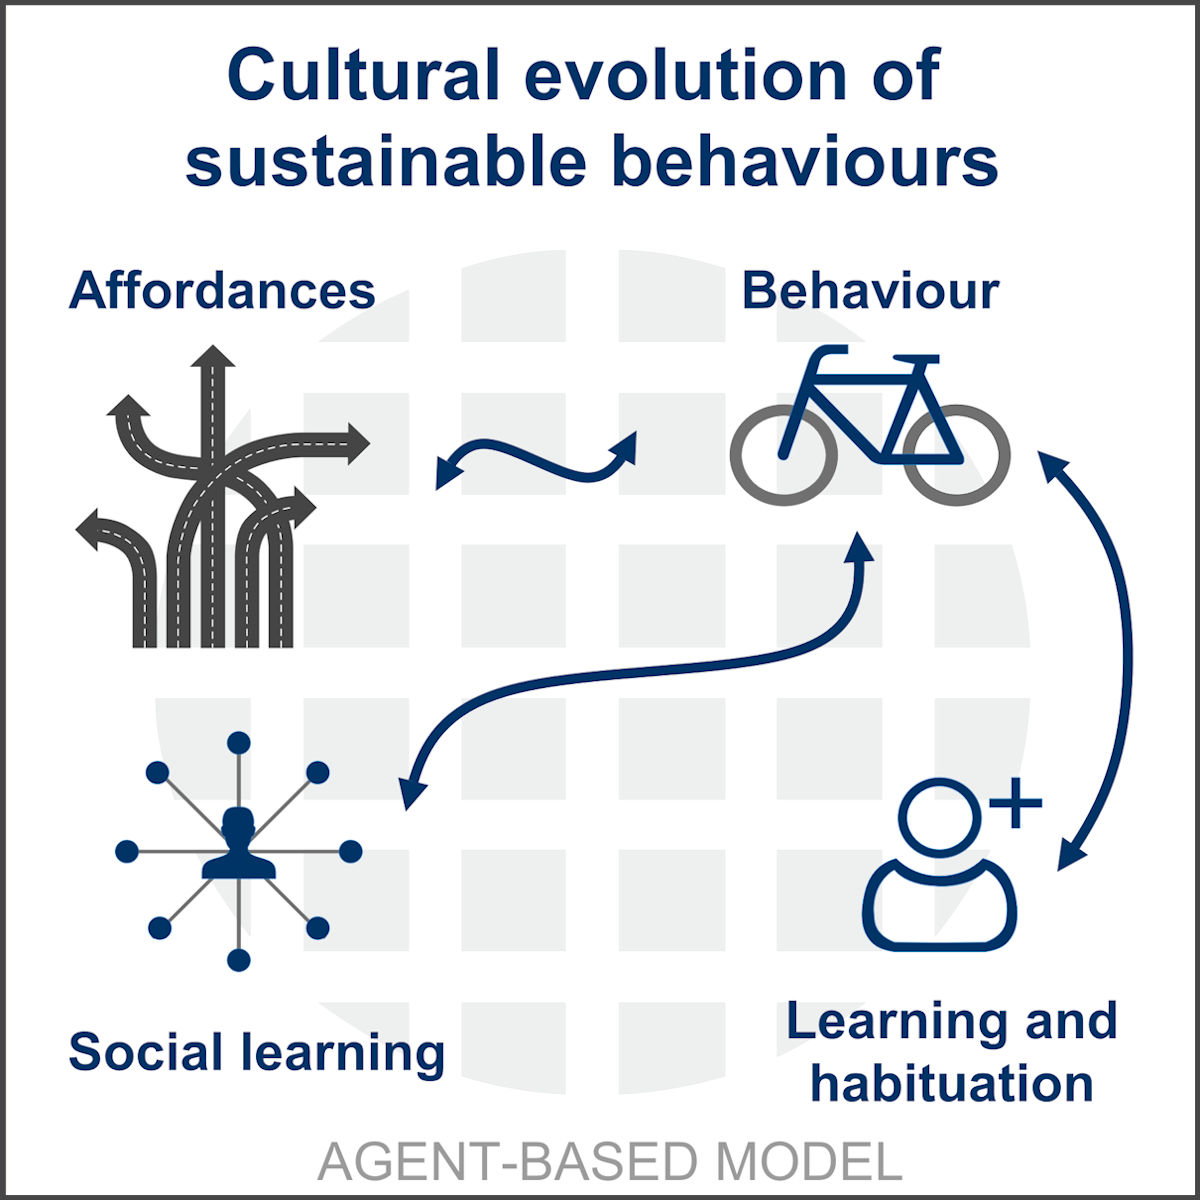 Since these have proved to be useful & fun, here’s a tweetorial on our new research project “Cultural Evolution of Sustainable Behaviors: Pro-environmental Tipping Points in an Agent-Based Model” published in  @OneEarth_CP & done at  @IIASAVienna: (1/16) https://www.cell.com/one-earth/fulltext/S2590-3322(20)30003-8